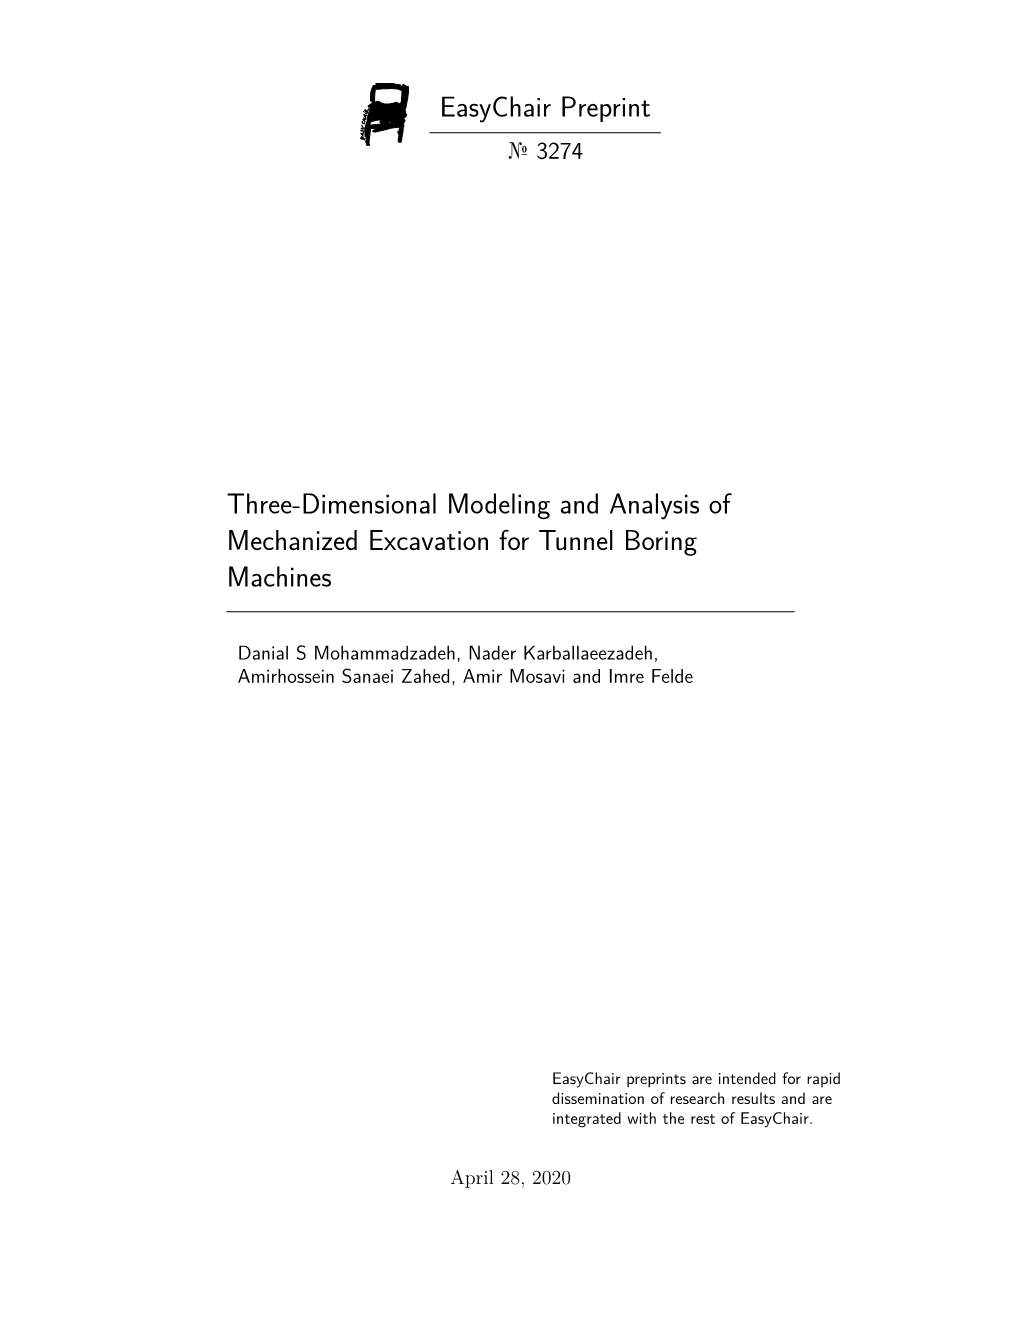 Three-Dimensional Modeling and Analysis of Mechanized Excavation for Tunnel Boring Machines